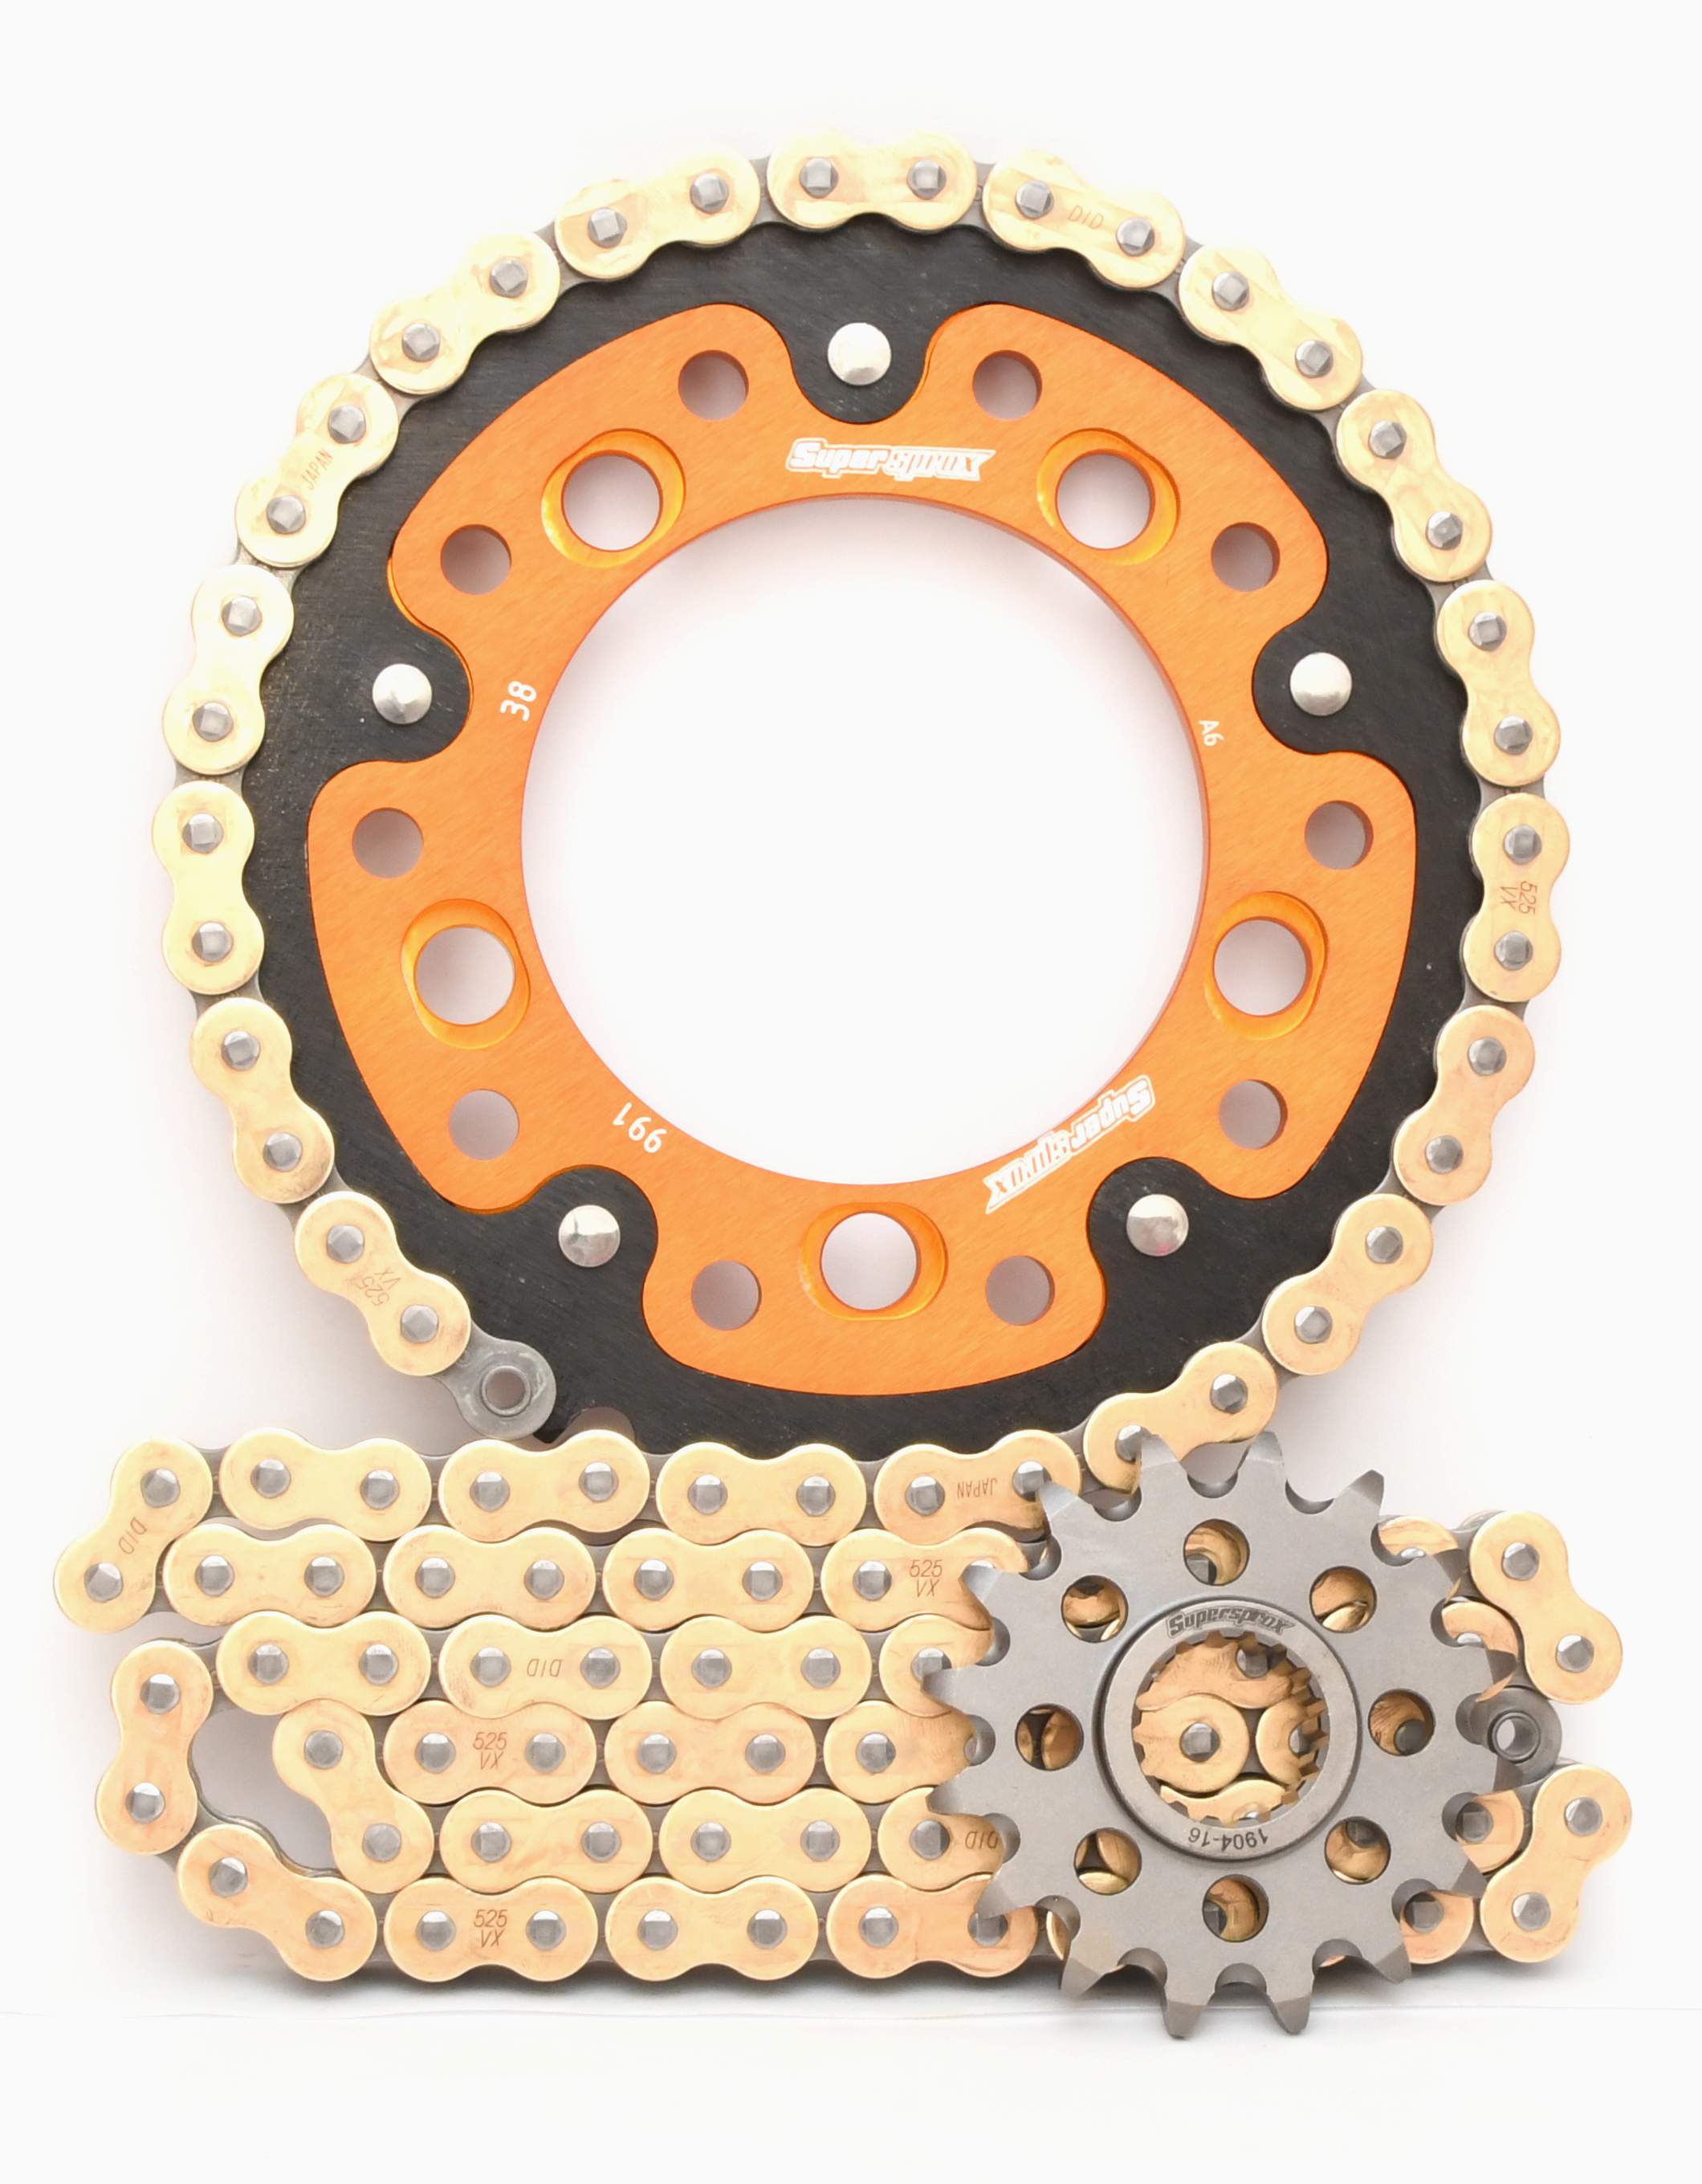 Supersprox Chain & Sprocket Kit for KTM 950/990 Supermoto (Inc R/T) 05-13 - Standard Gearing